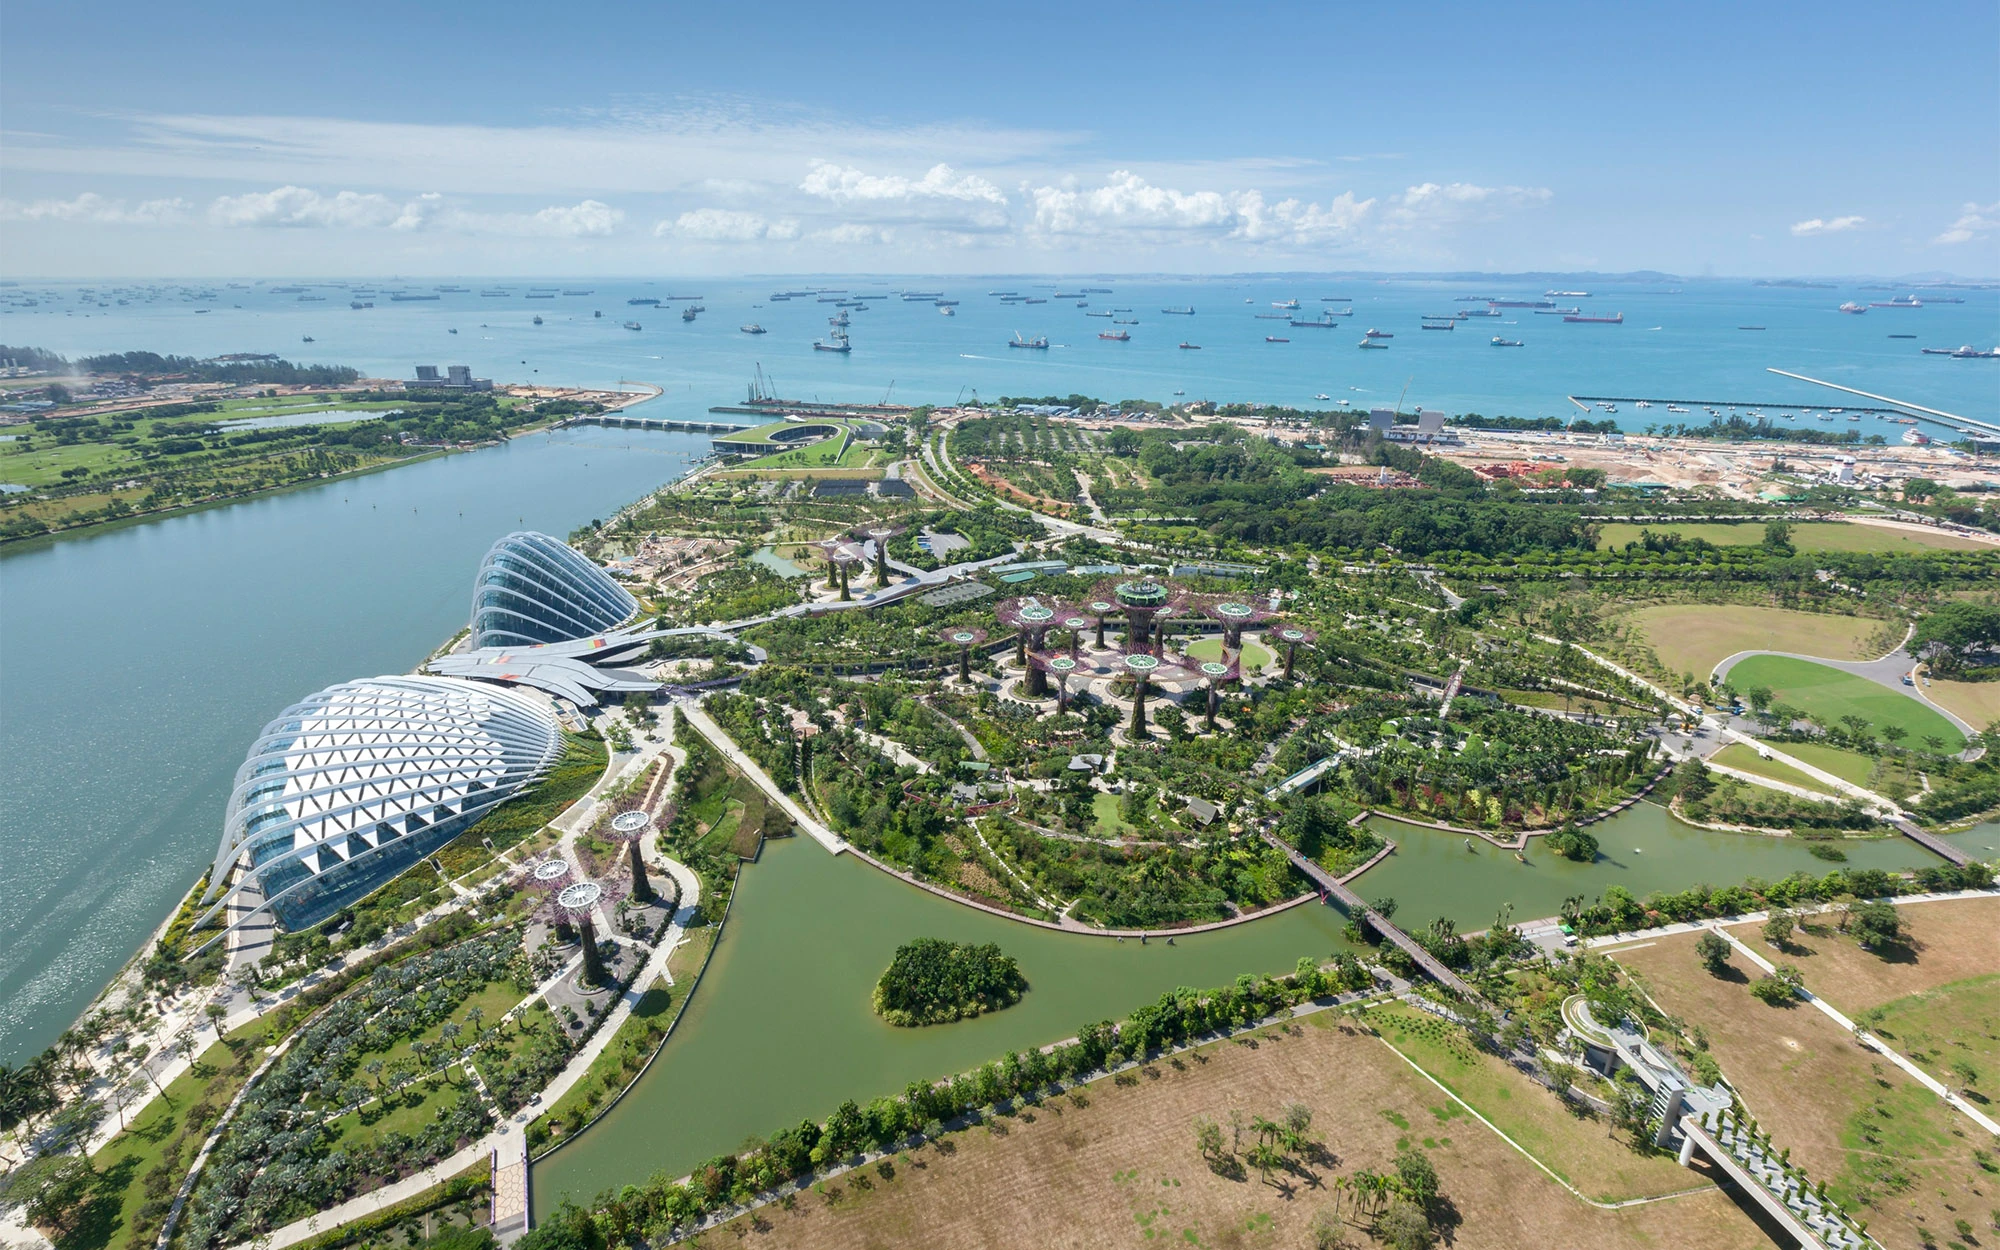 Aerial context image of Gardens by the Bay